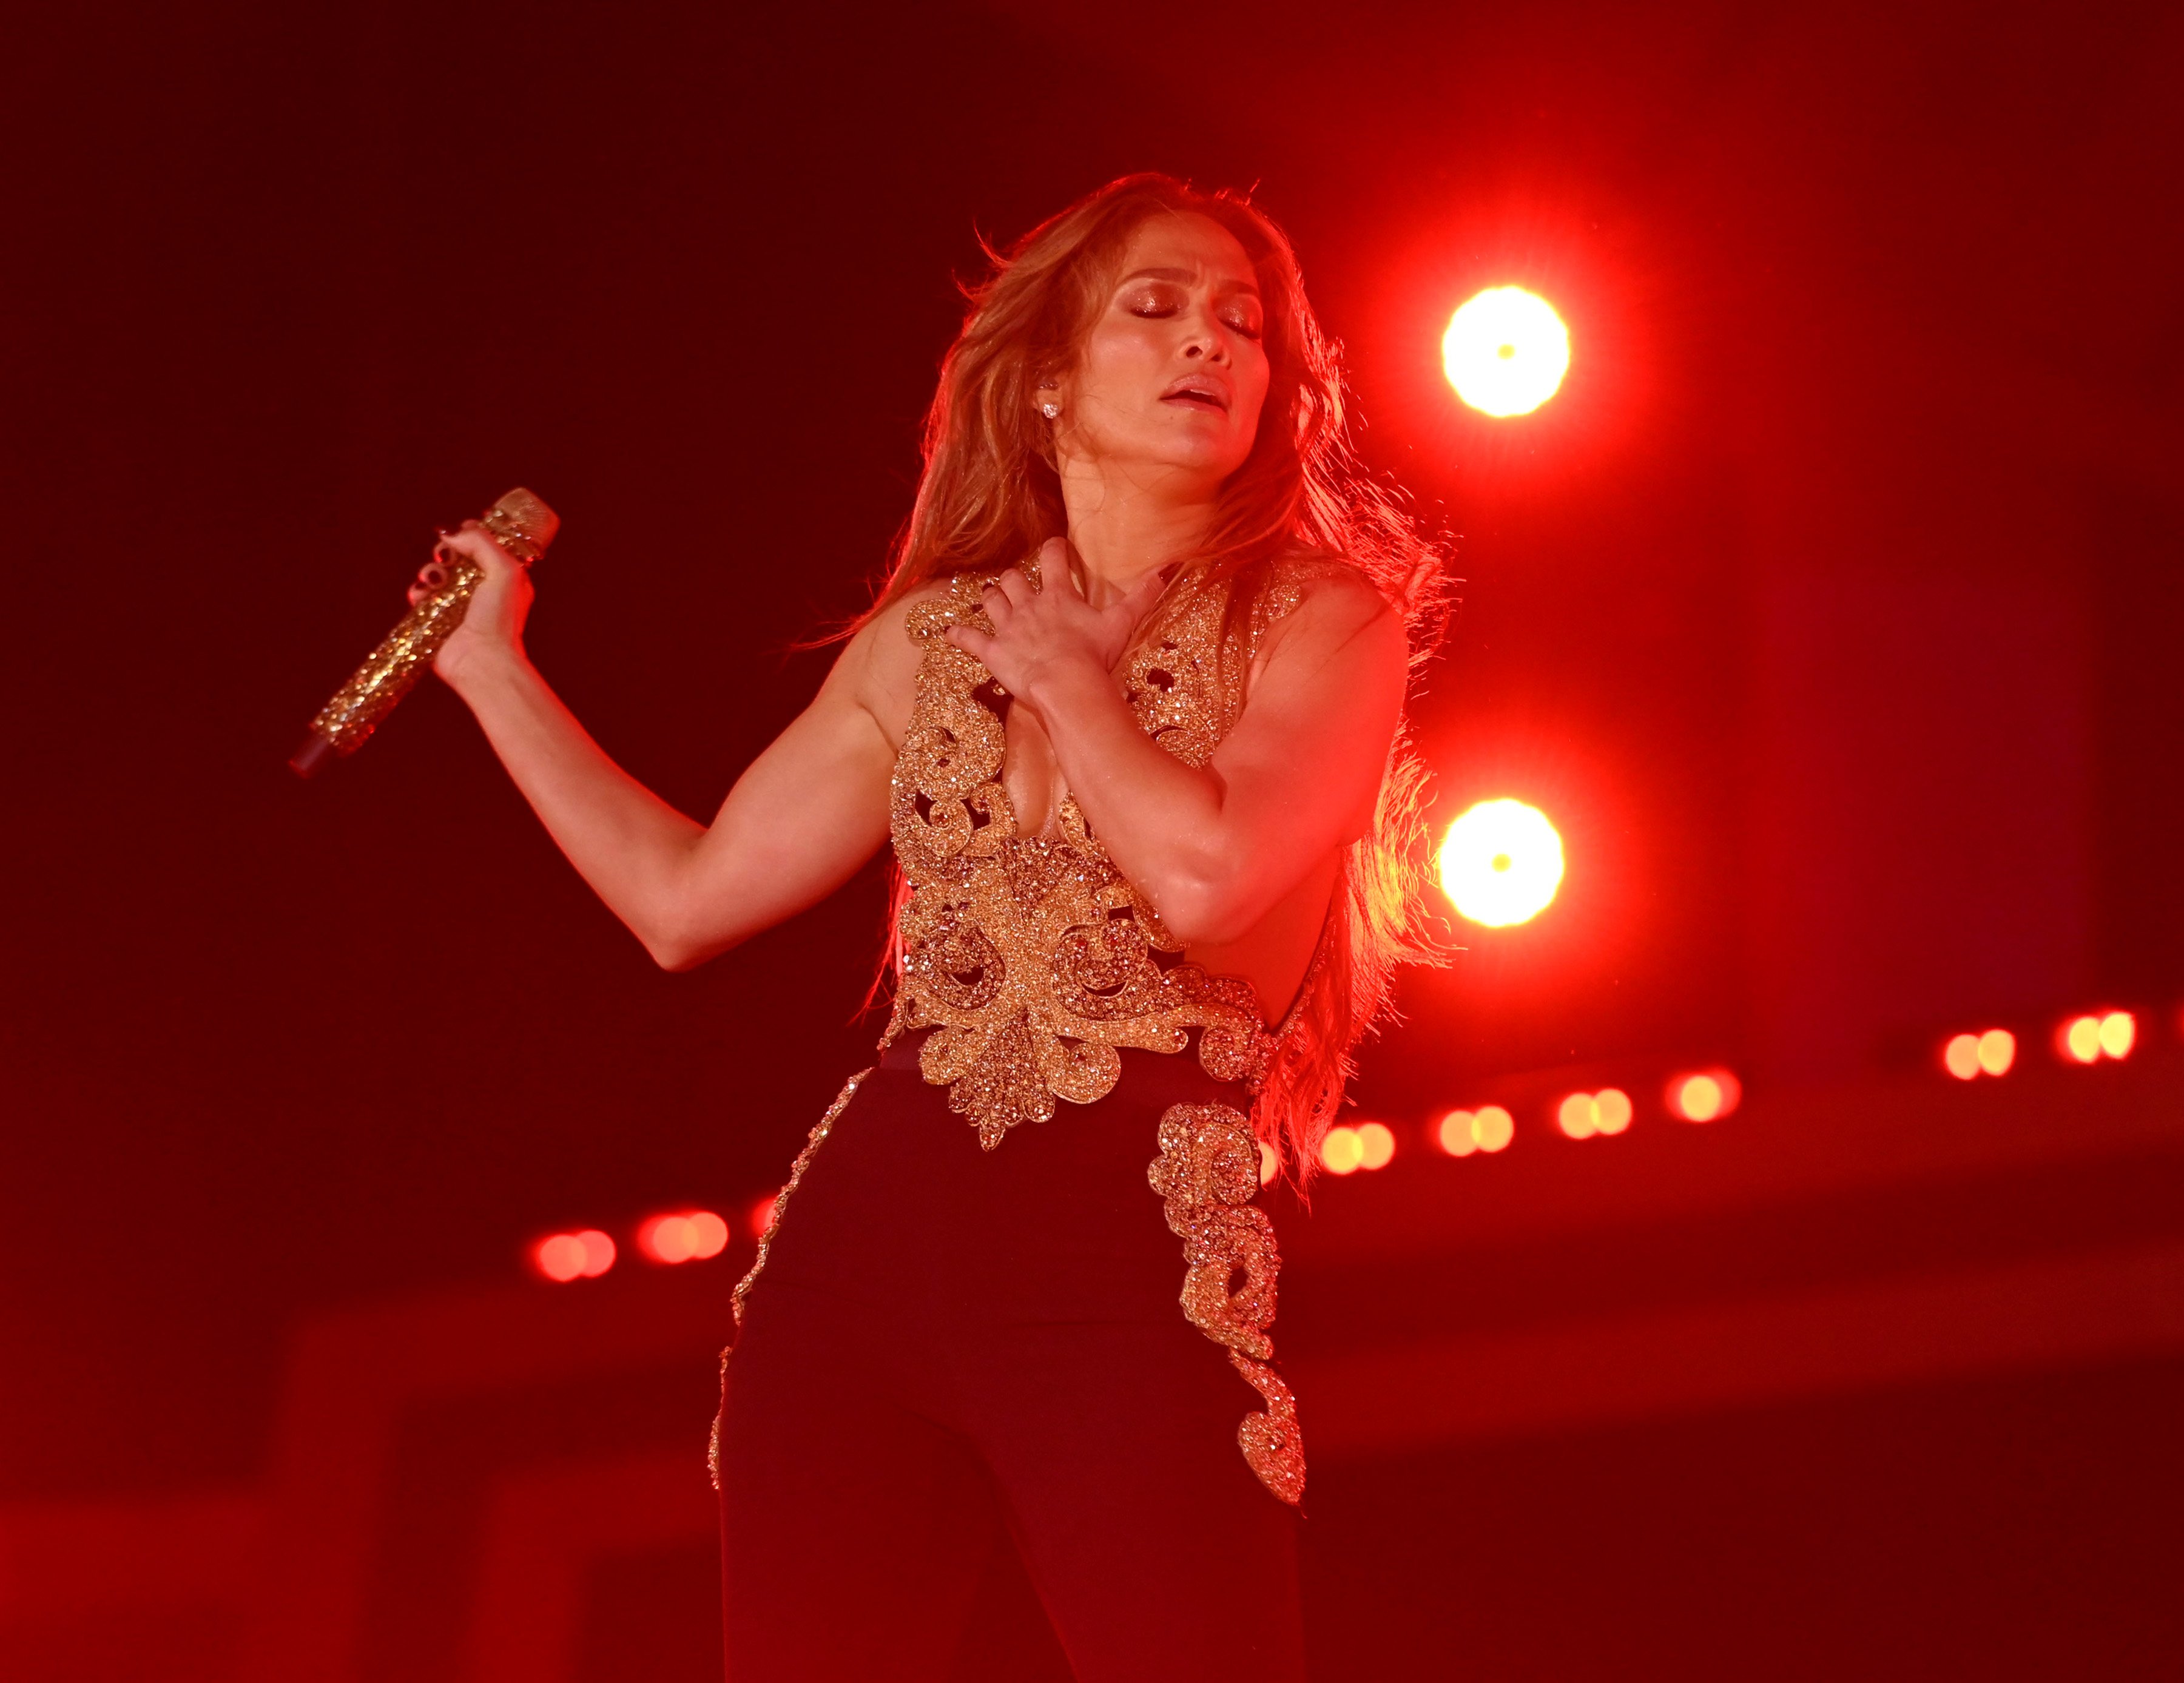 Jennifer Lopez closes her eyes and holds a microphone